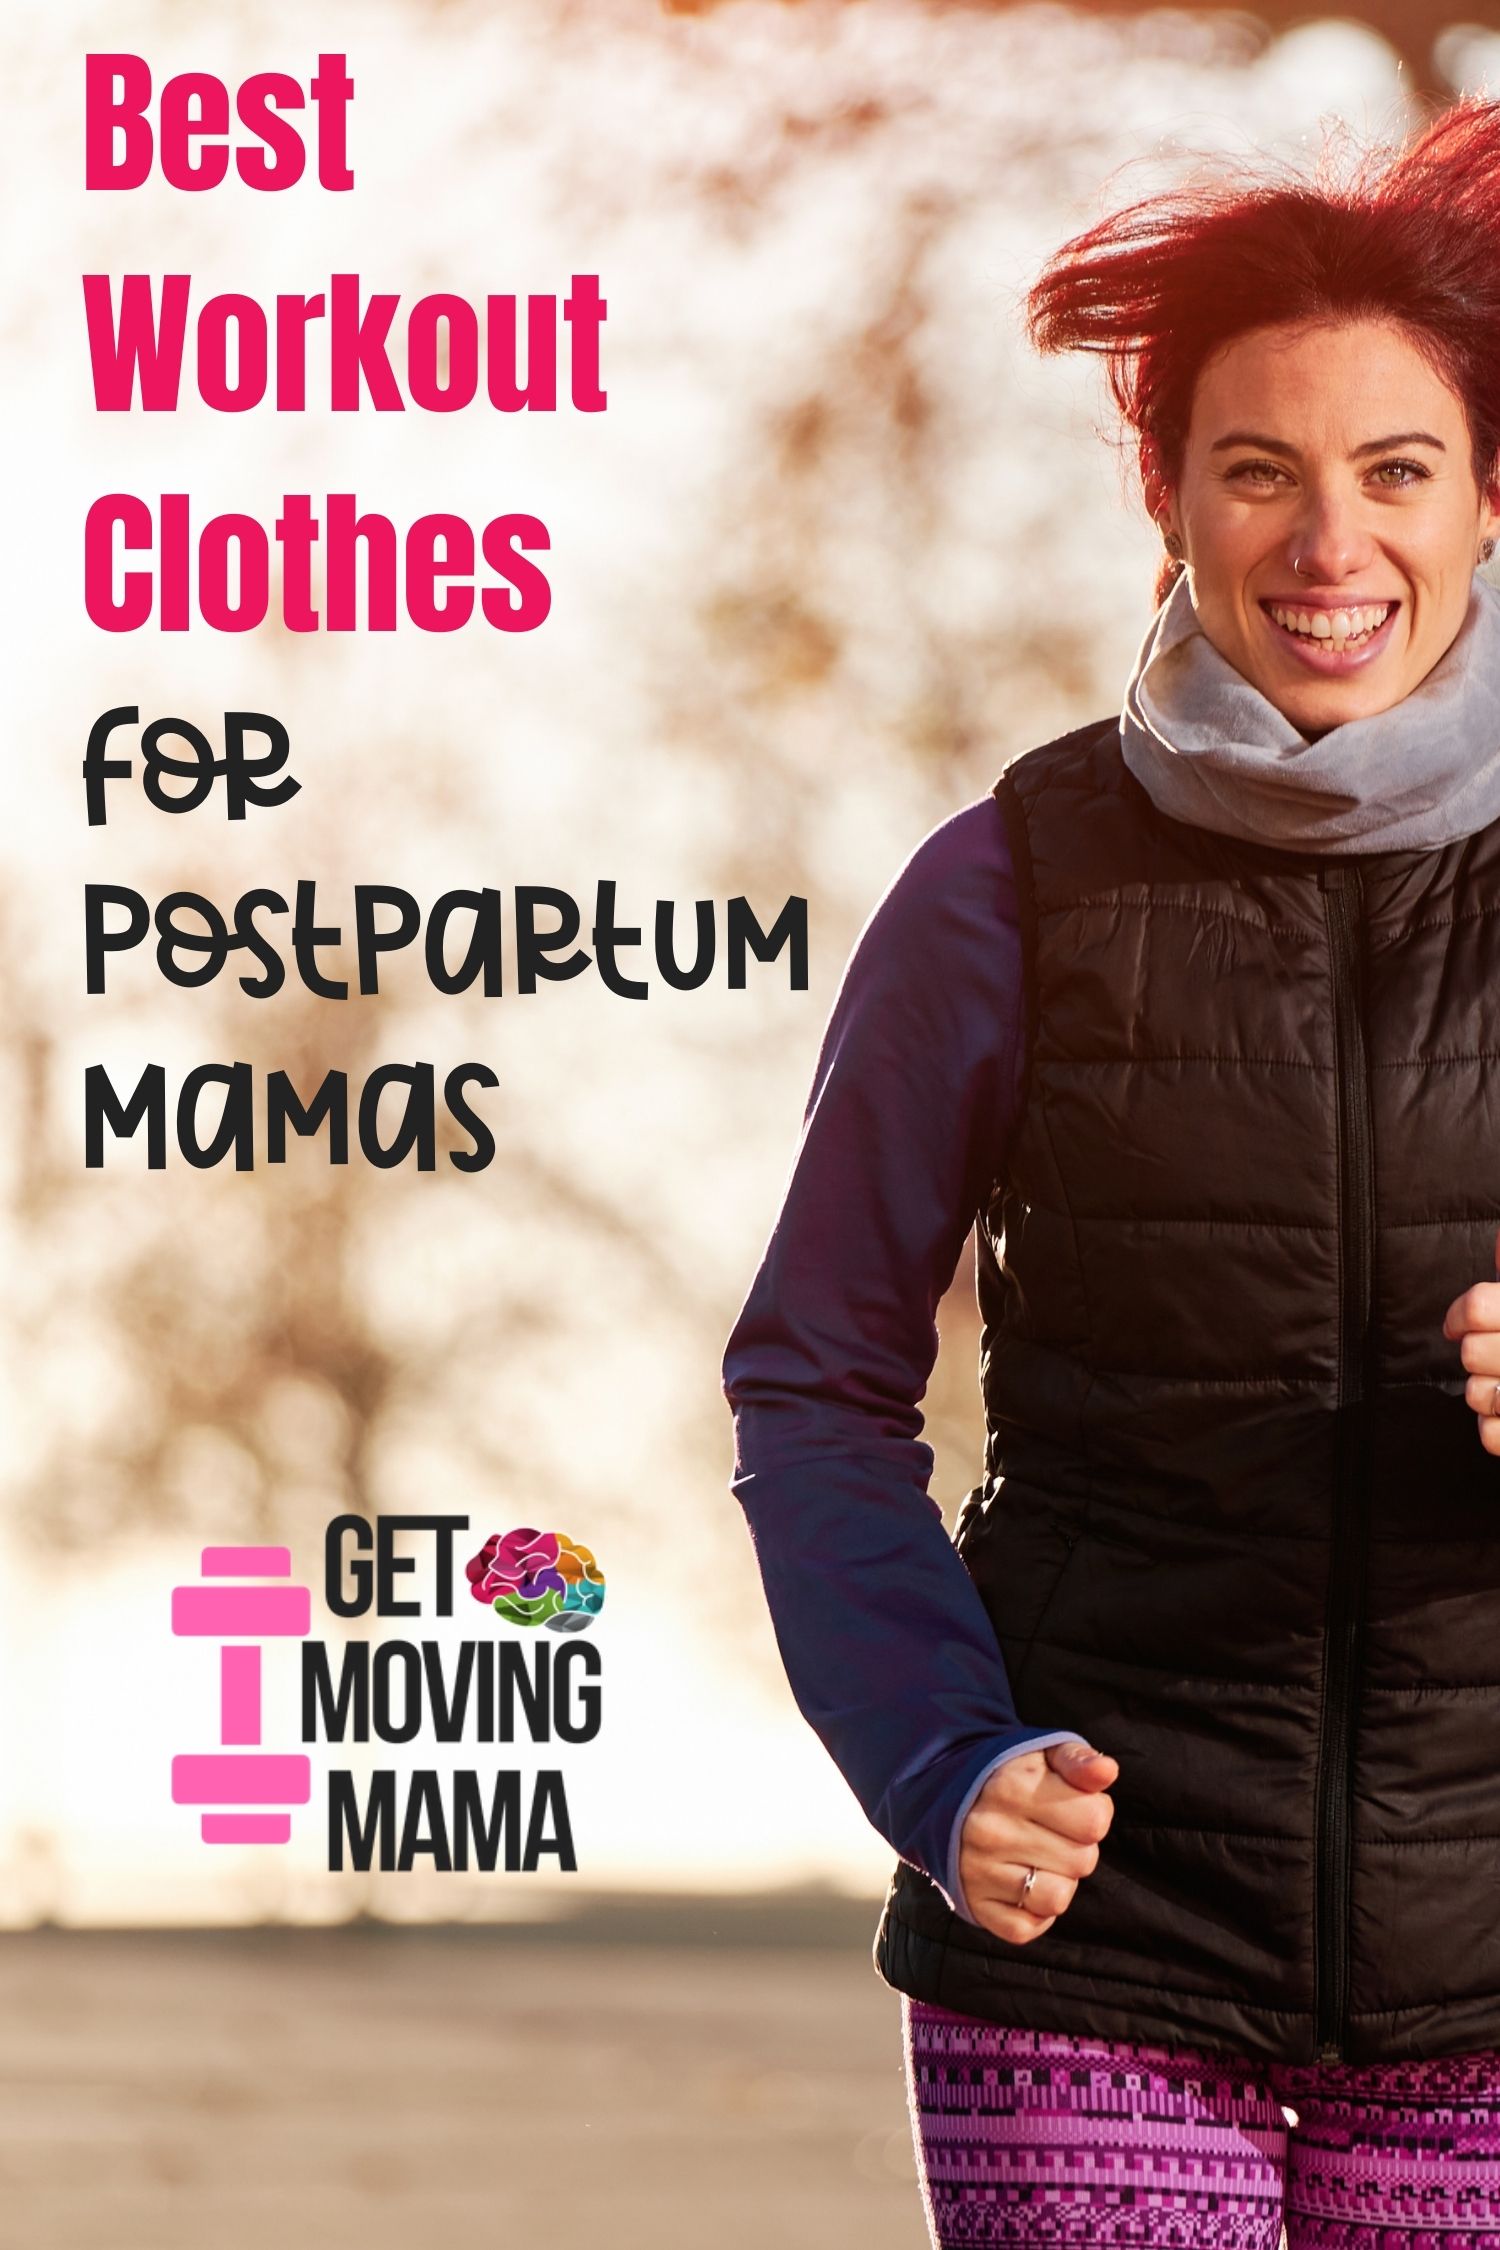 A picture of a woman running with best workout clothes for postpartum mamas written in pink and black text.